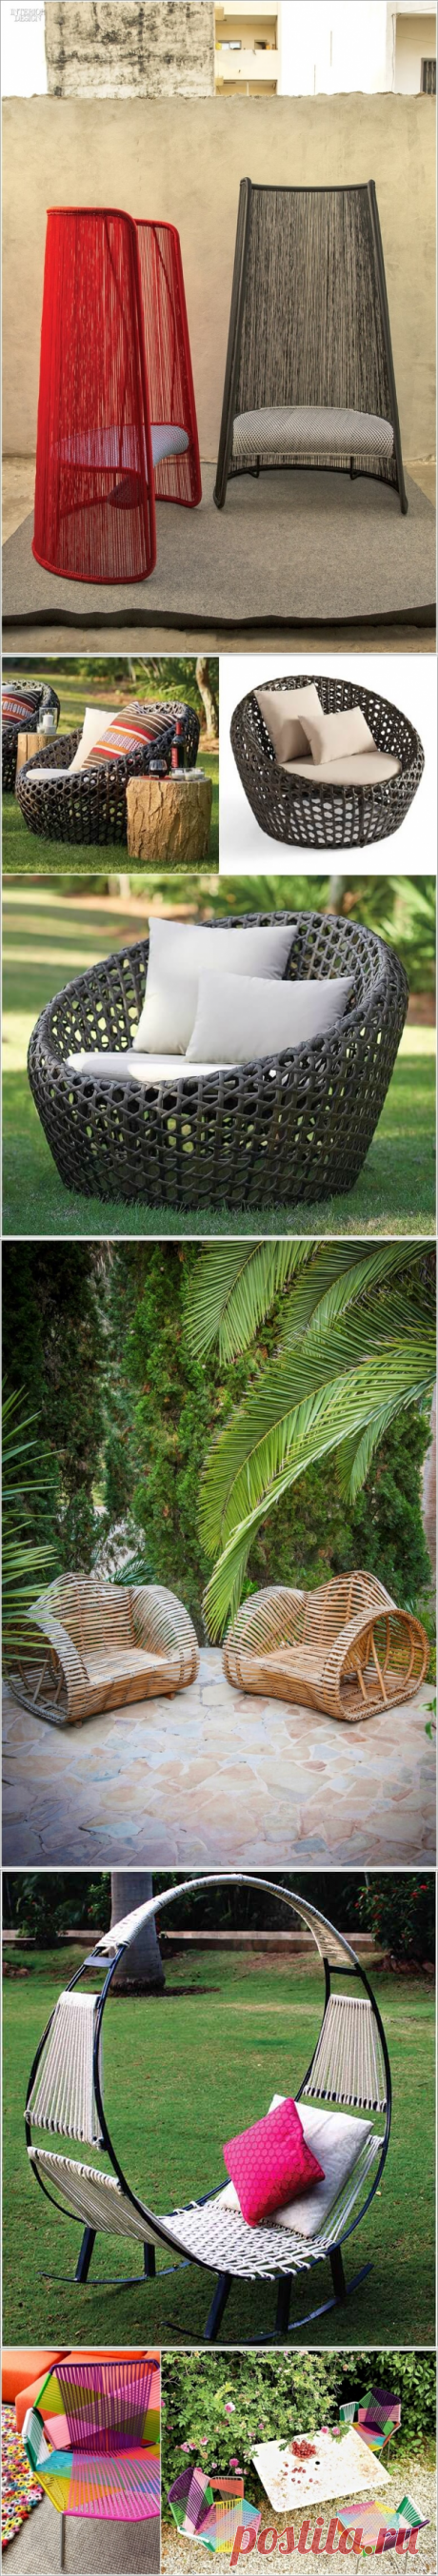 10 Outdoor Chair Designs You Would Love To Have